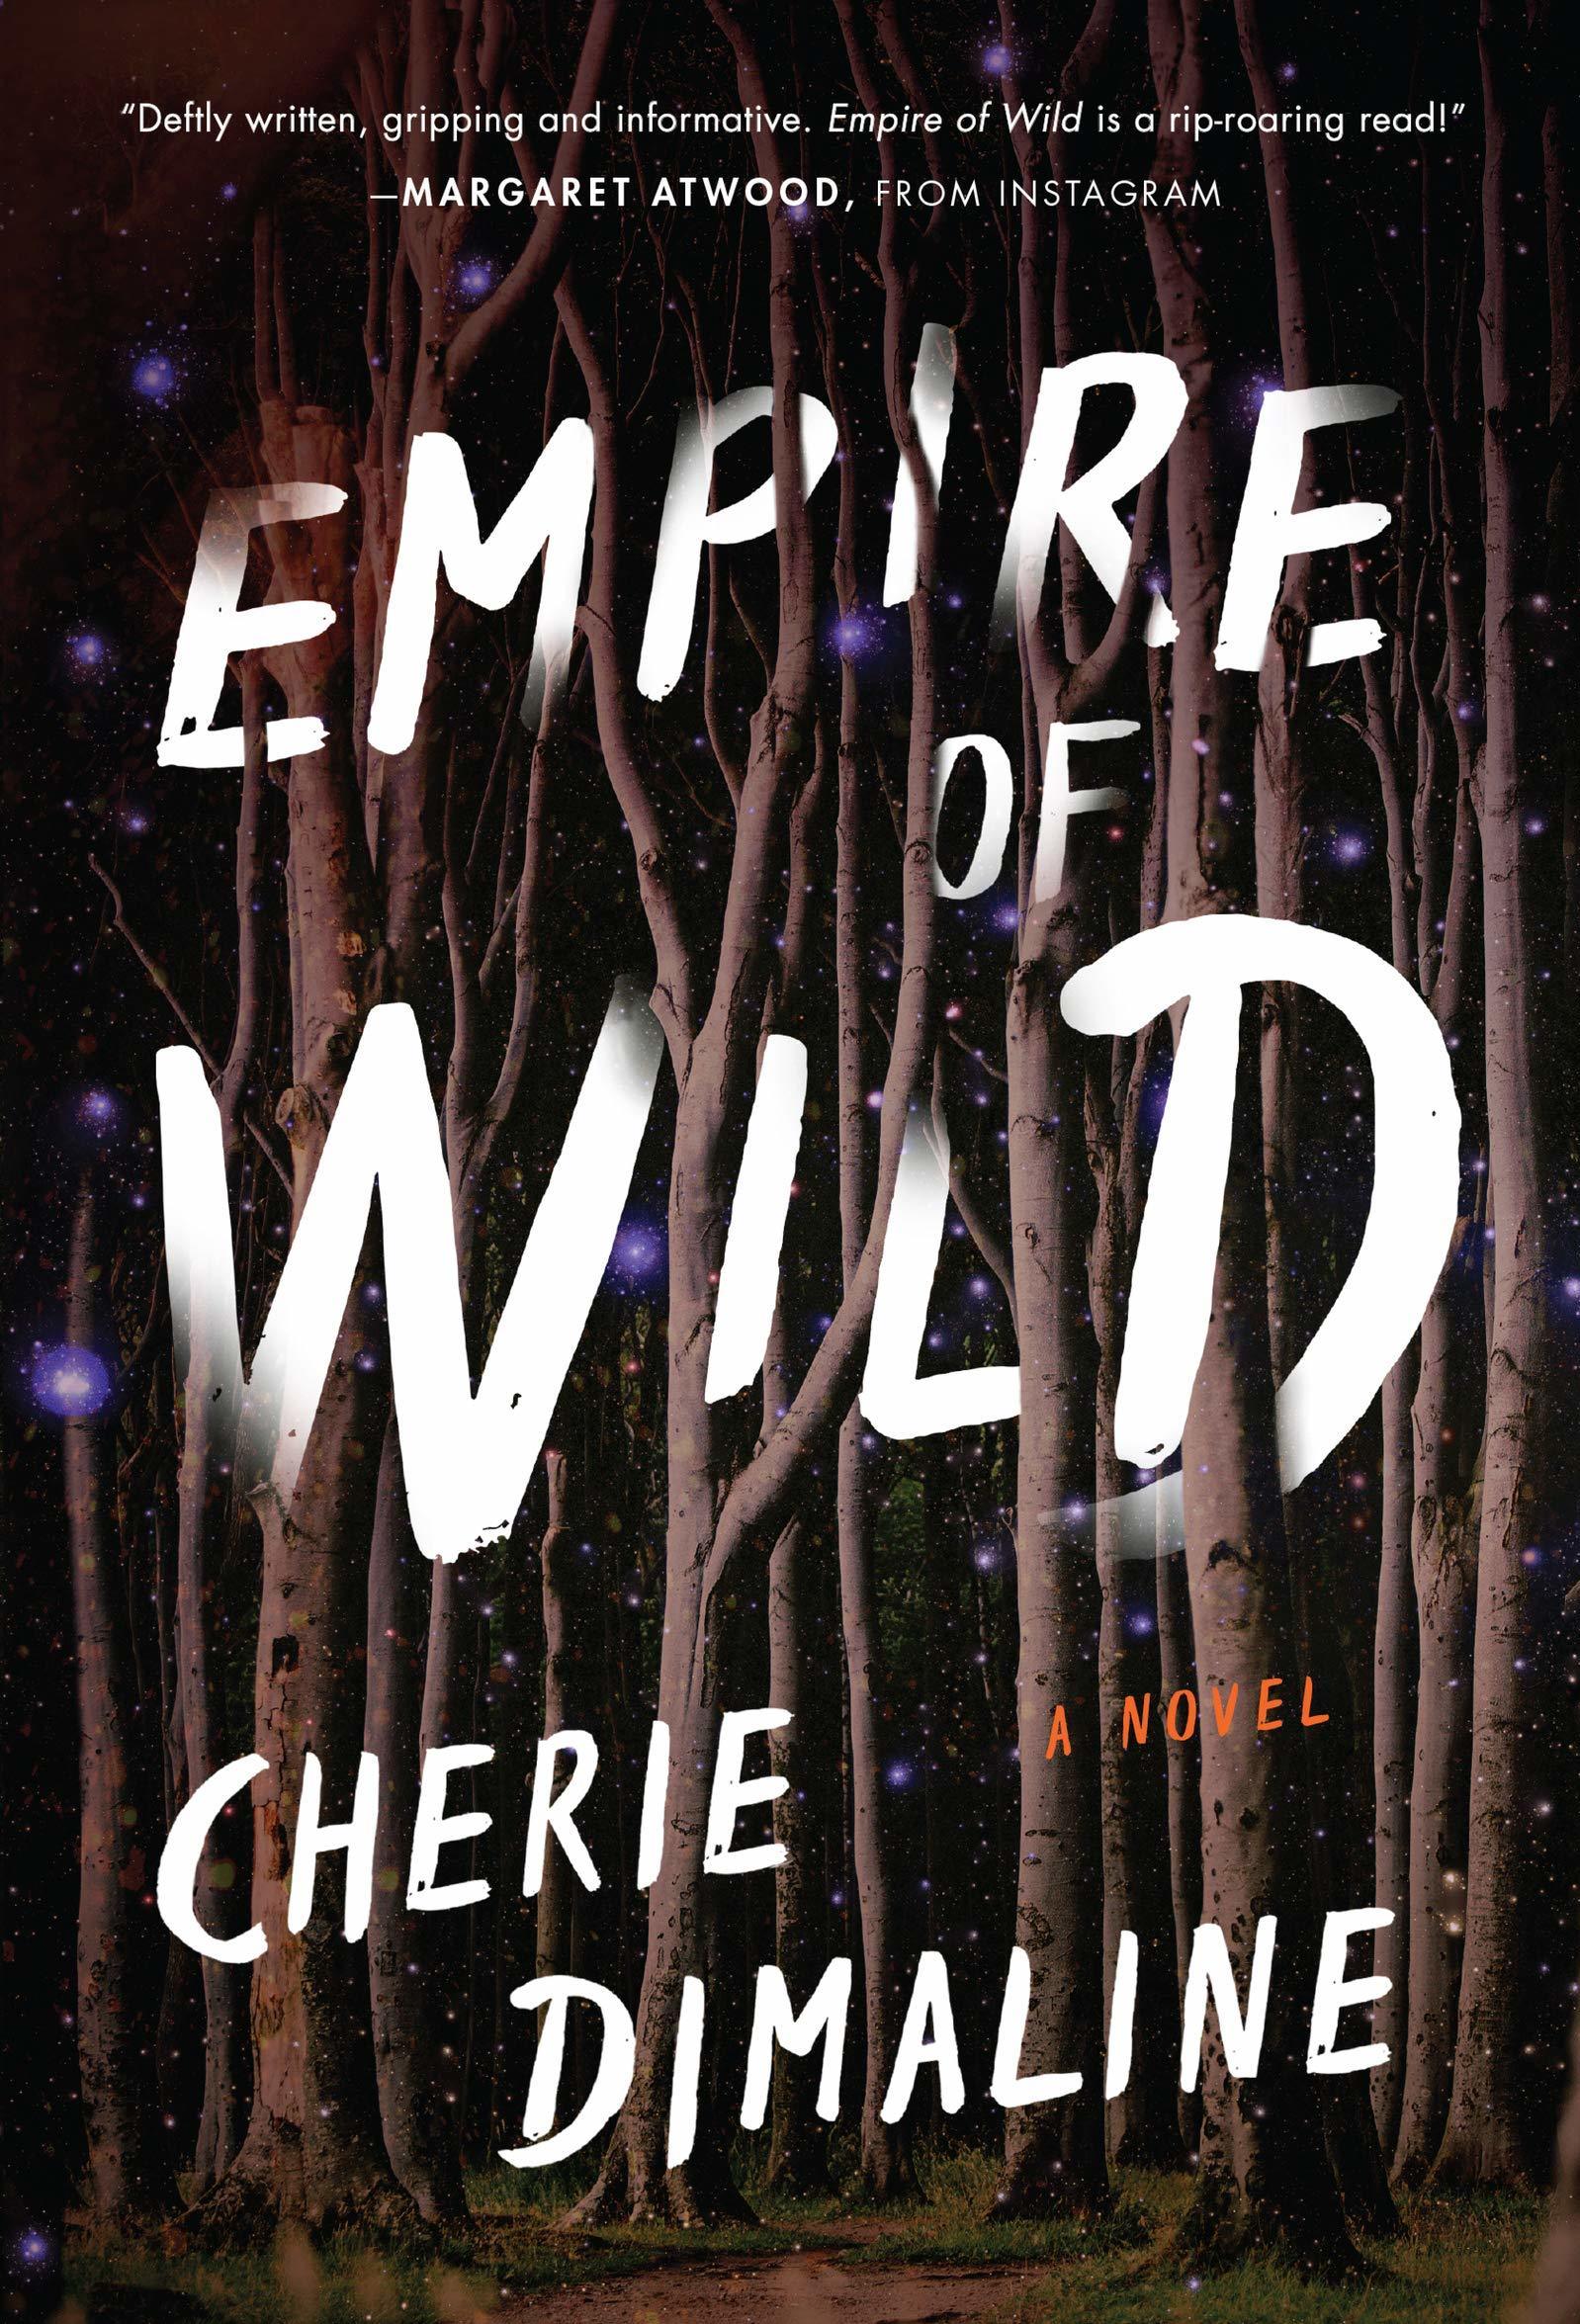 Image for "Empire of Wild"